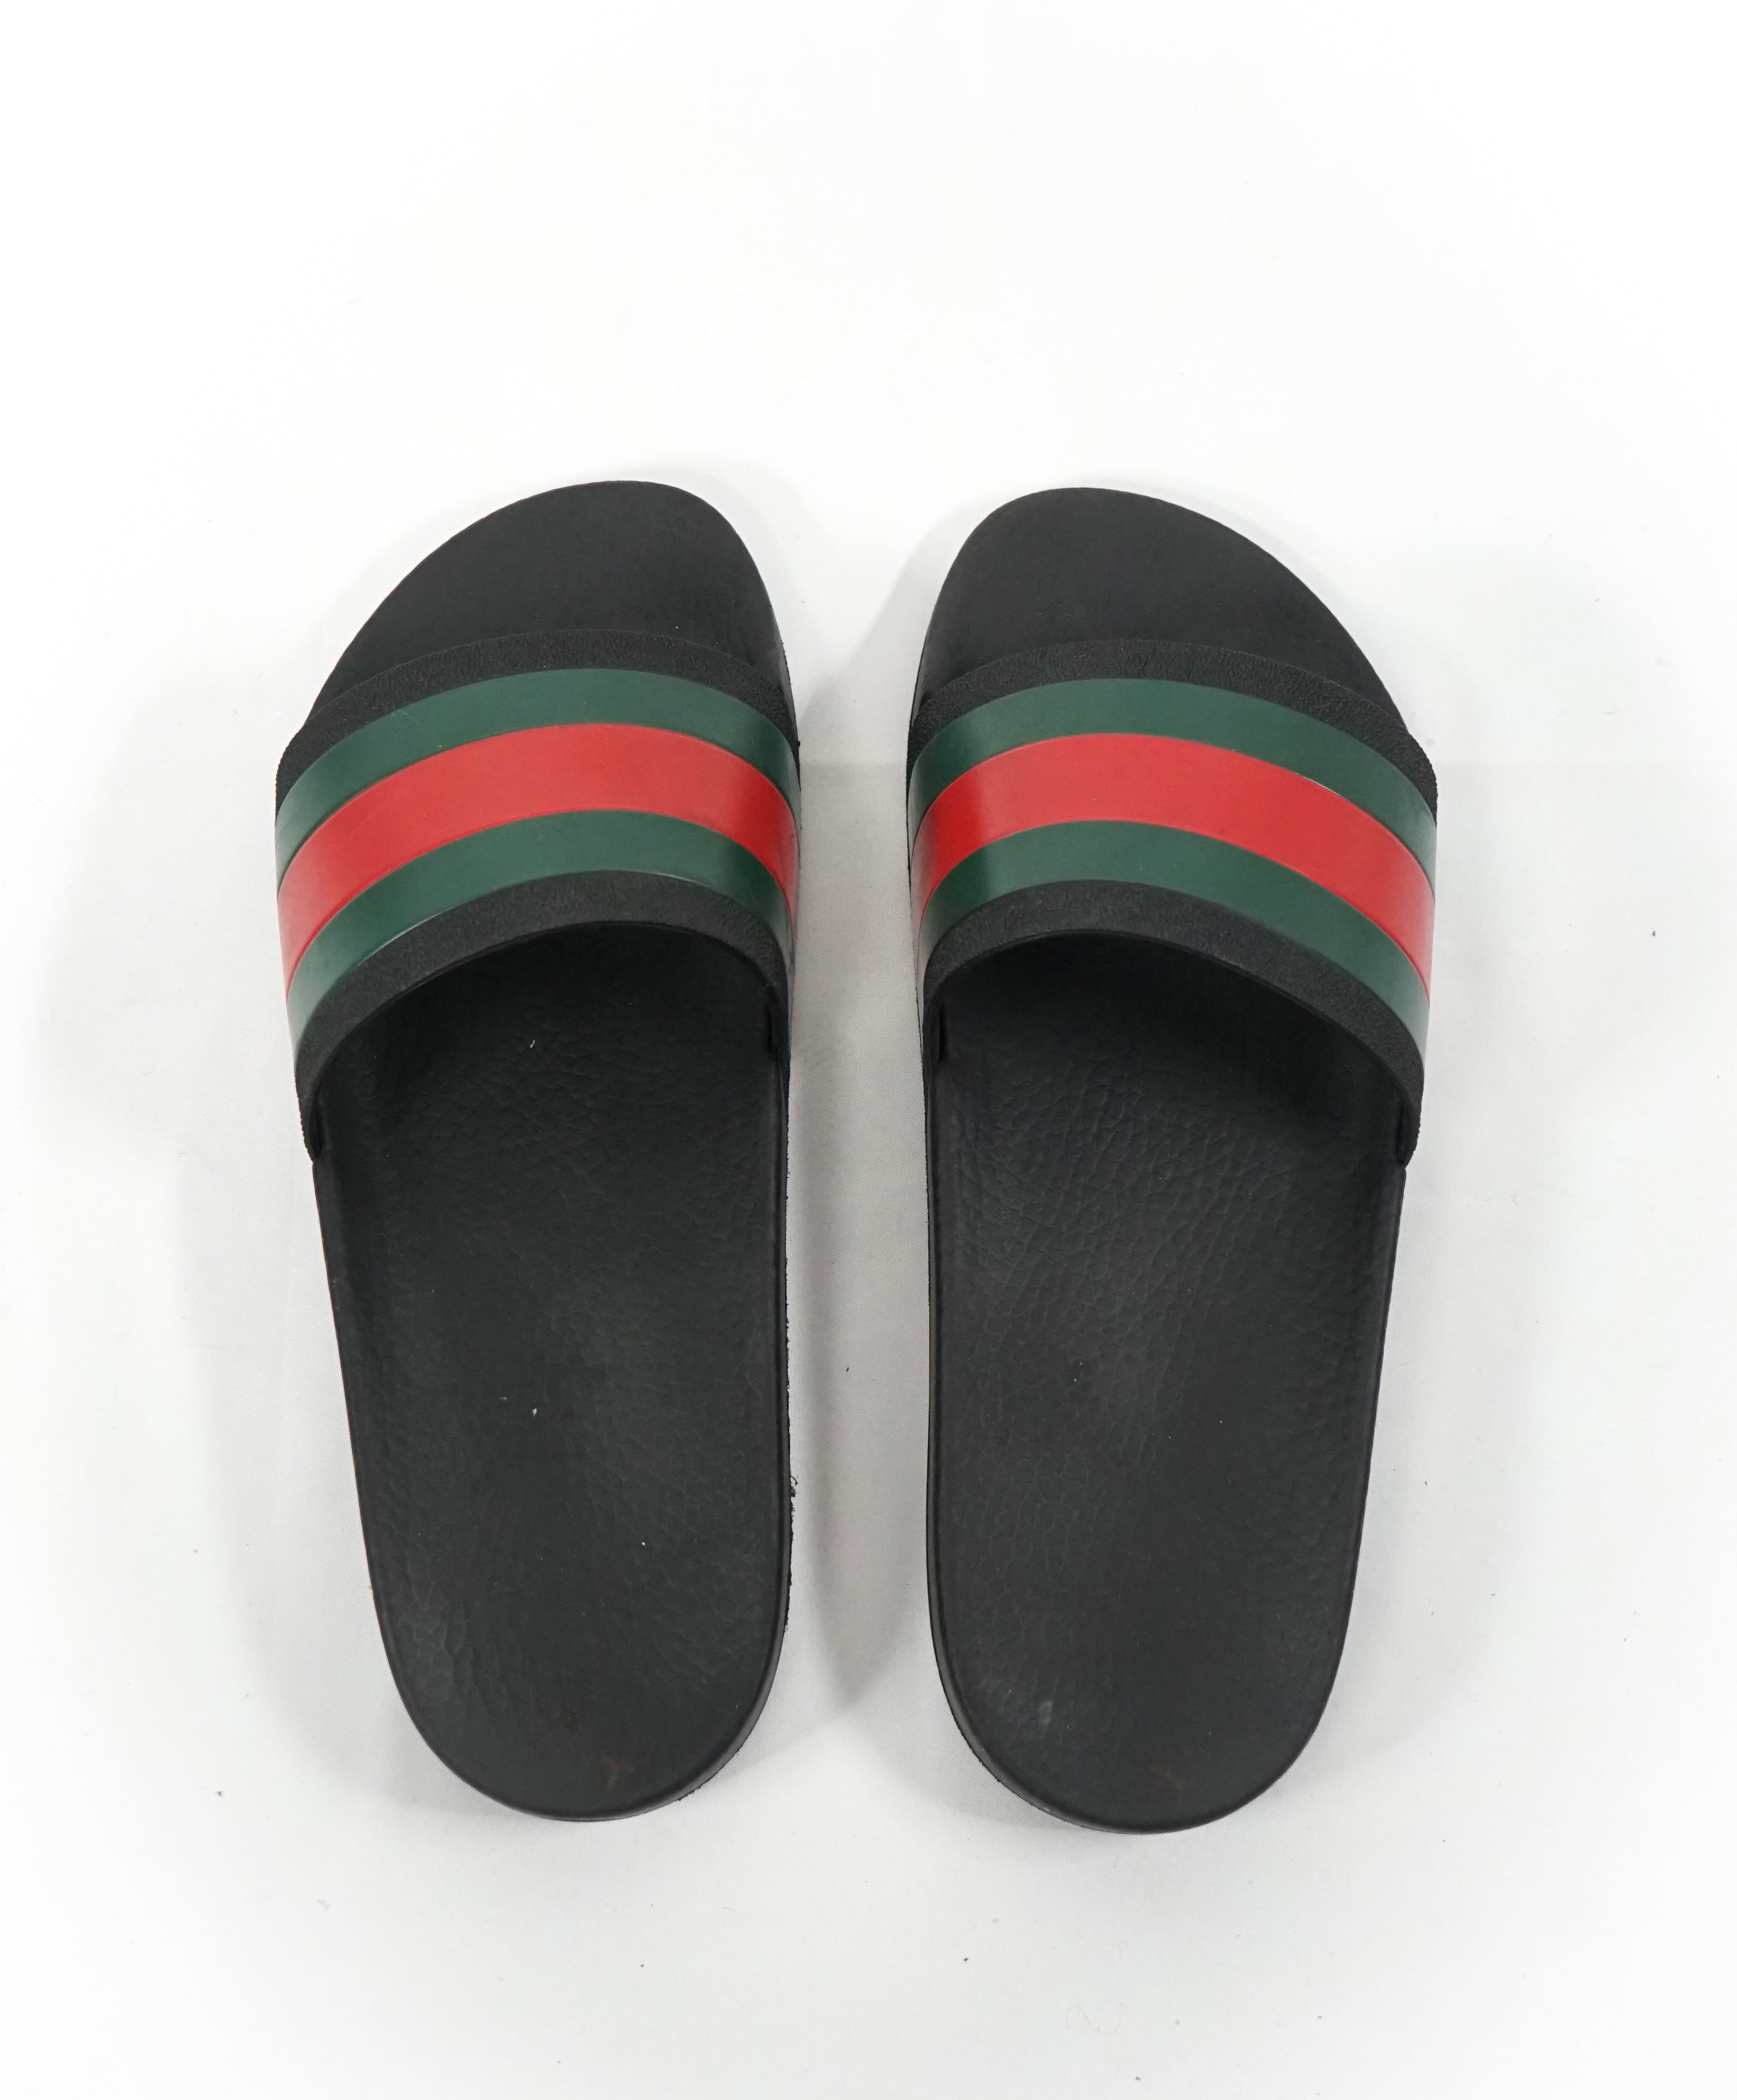 gucci green and red slides cheap online